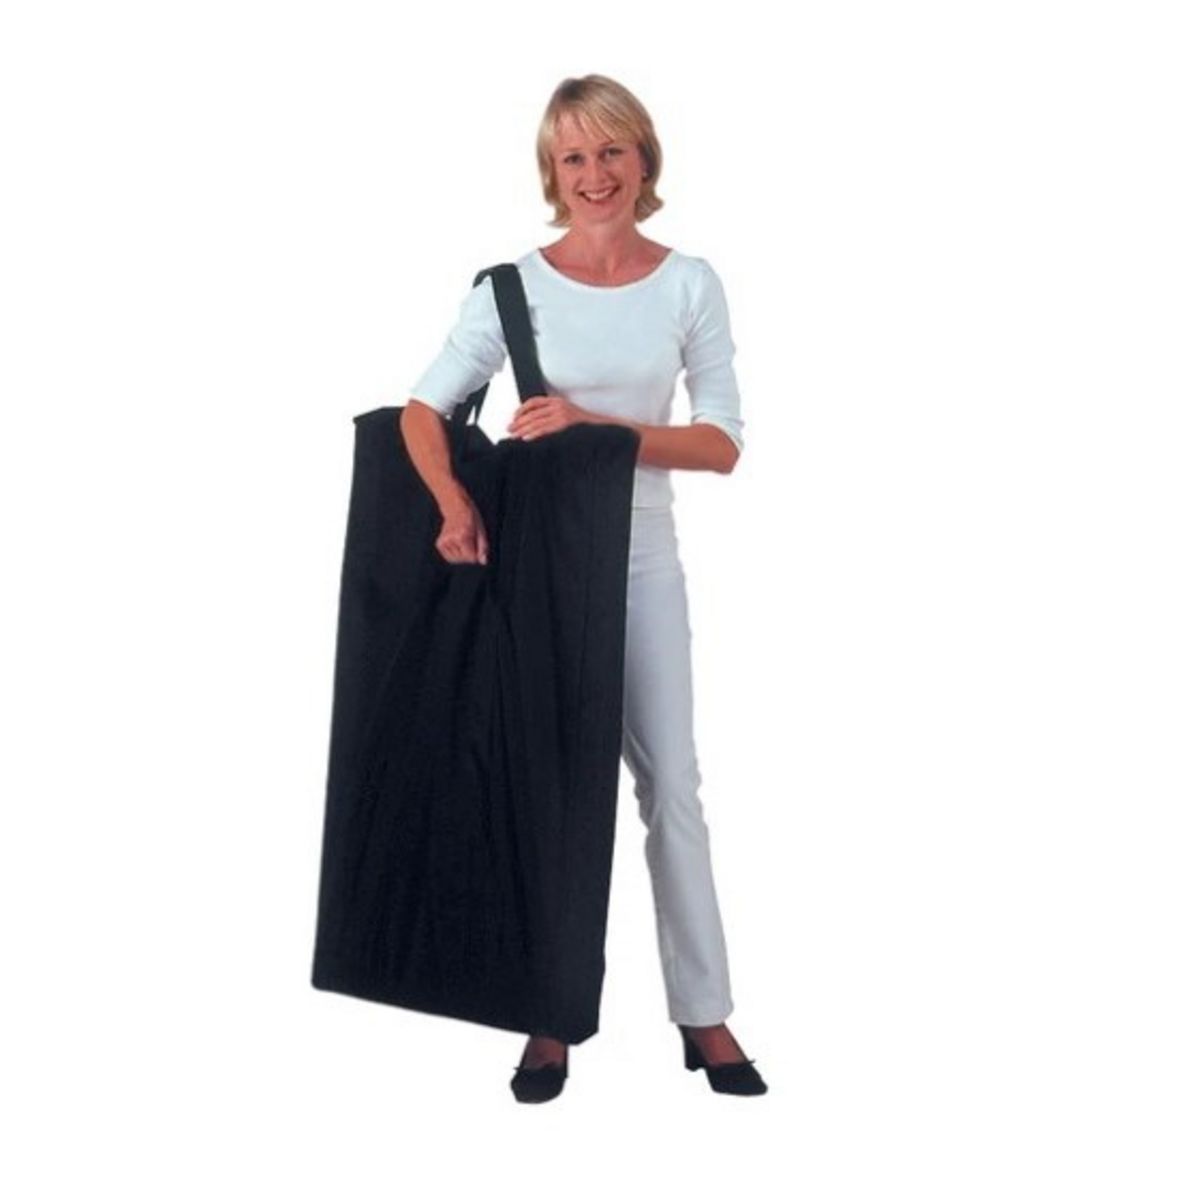 Lady holding carry bag including the Demo Center promotional display counter parts..jpg